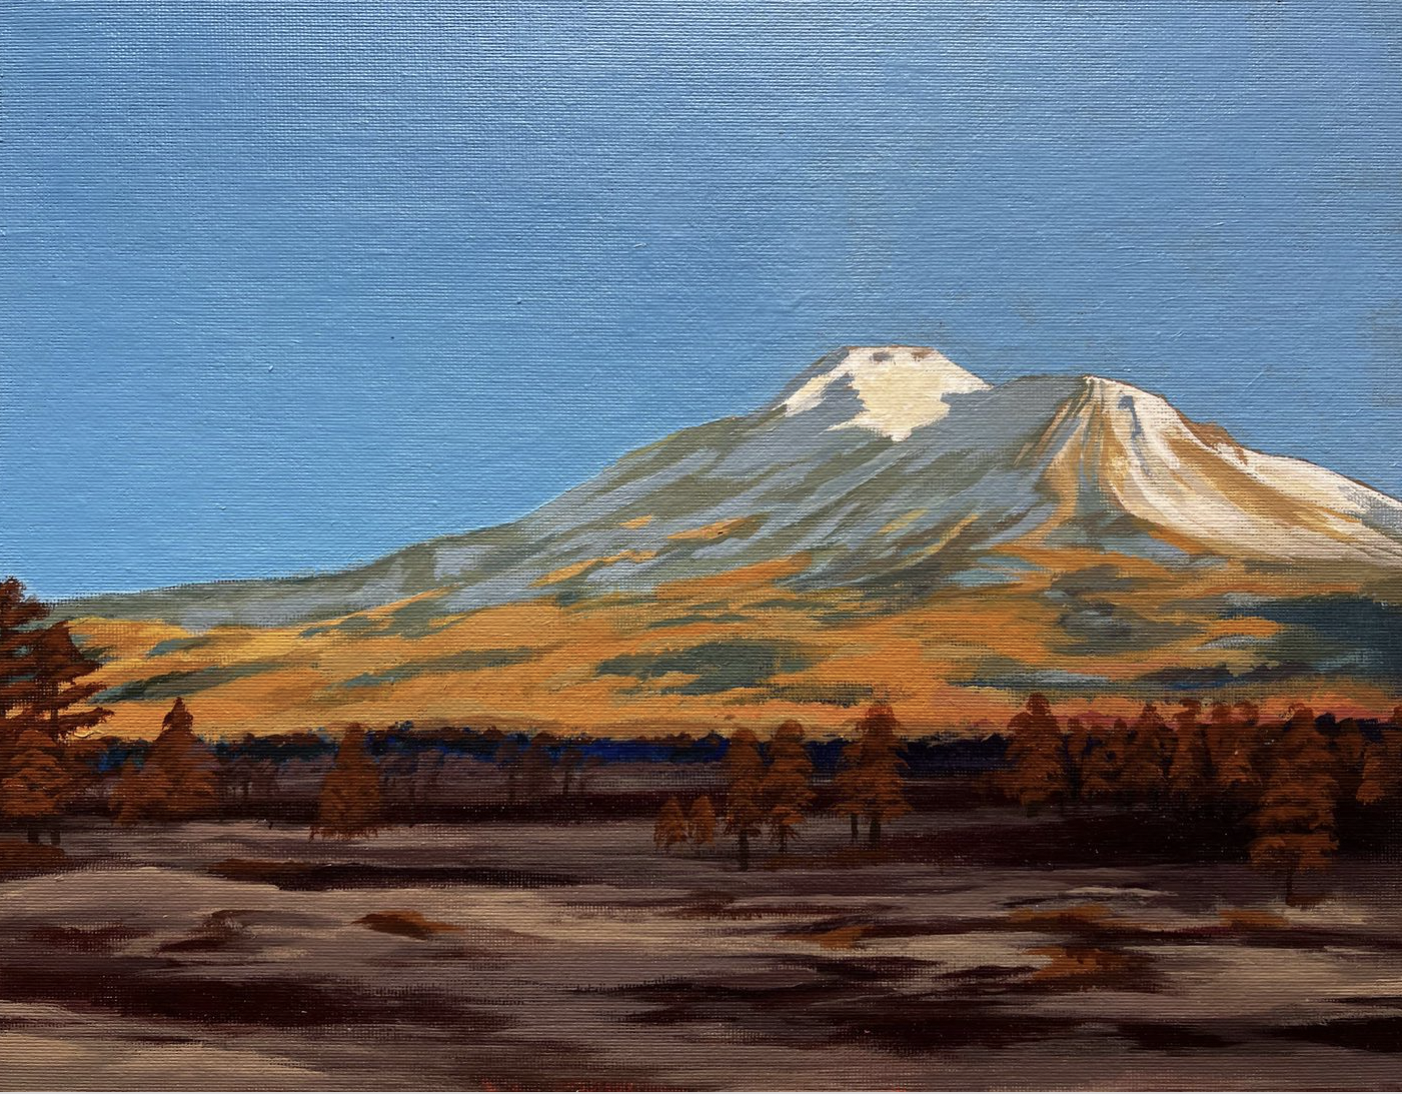 Painting of landscape with dark soil in foreground and colorful snow-capped mountain in distance